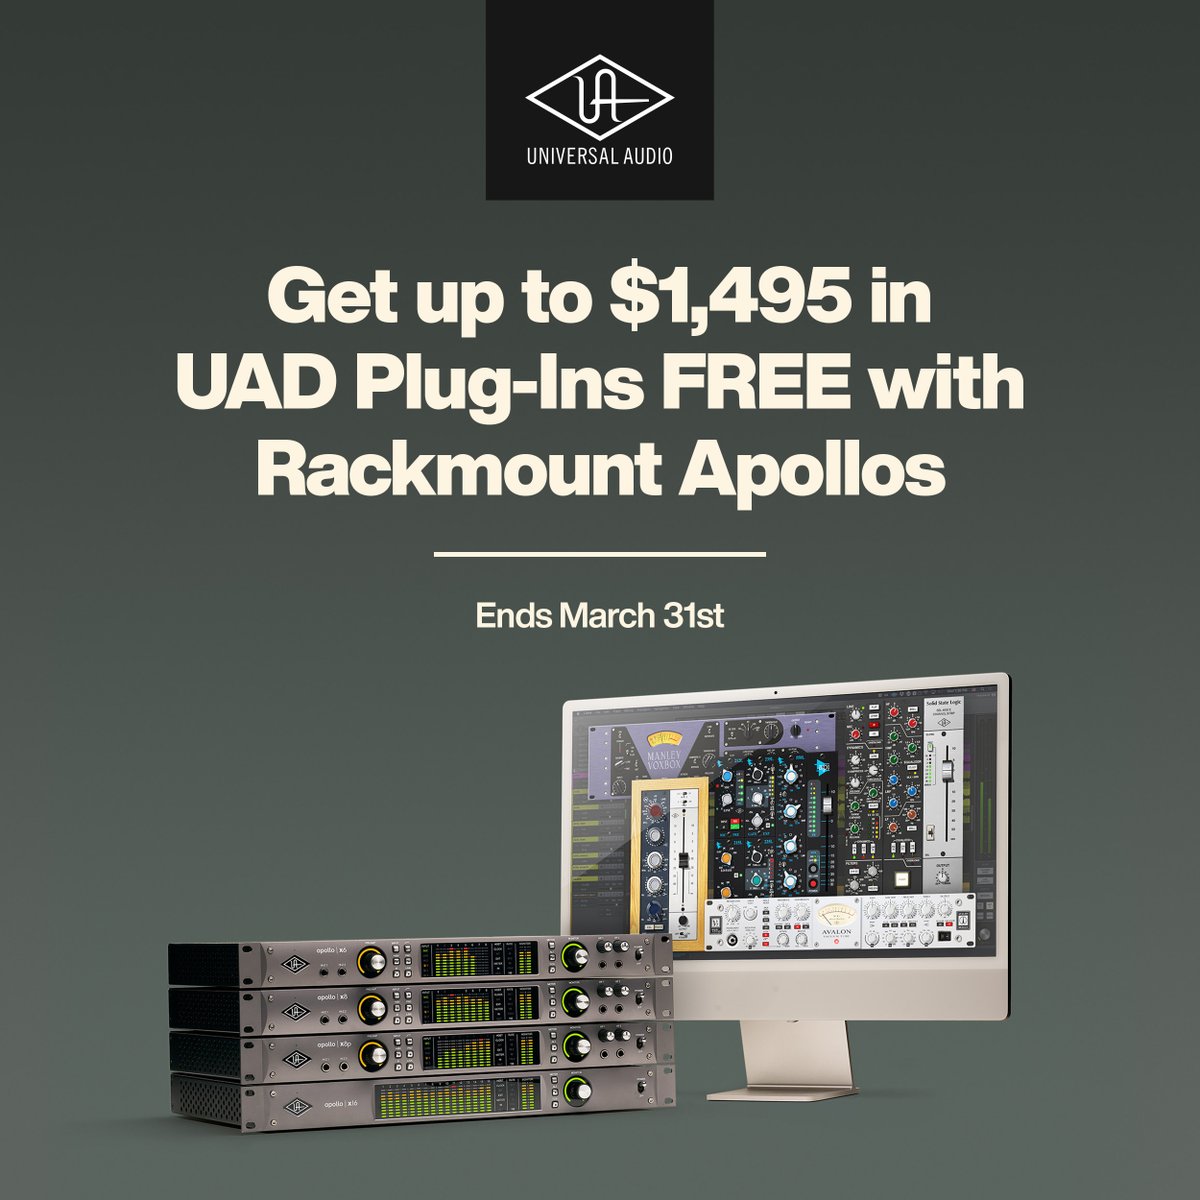 Buy any new Universal Audio Apollo rackmount or 4x audio interface and receive a UAD plug-in bundle valued at up to $1495 for FREE! 😍

This includes premium plug-ins from Neve, API, Manley, Avalon, and more! 🔥

Hit the link and explore. 👉 bit.ly/3uH8uEy